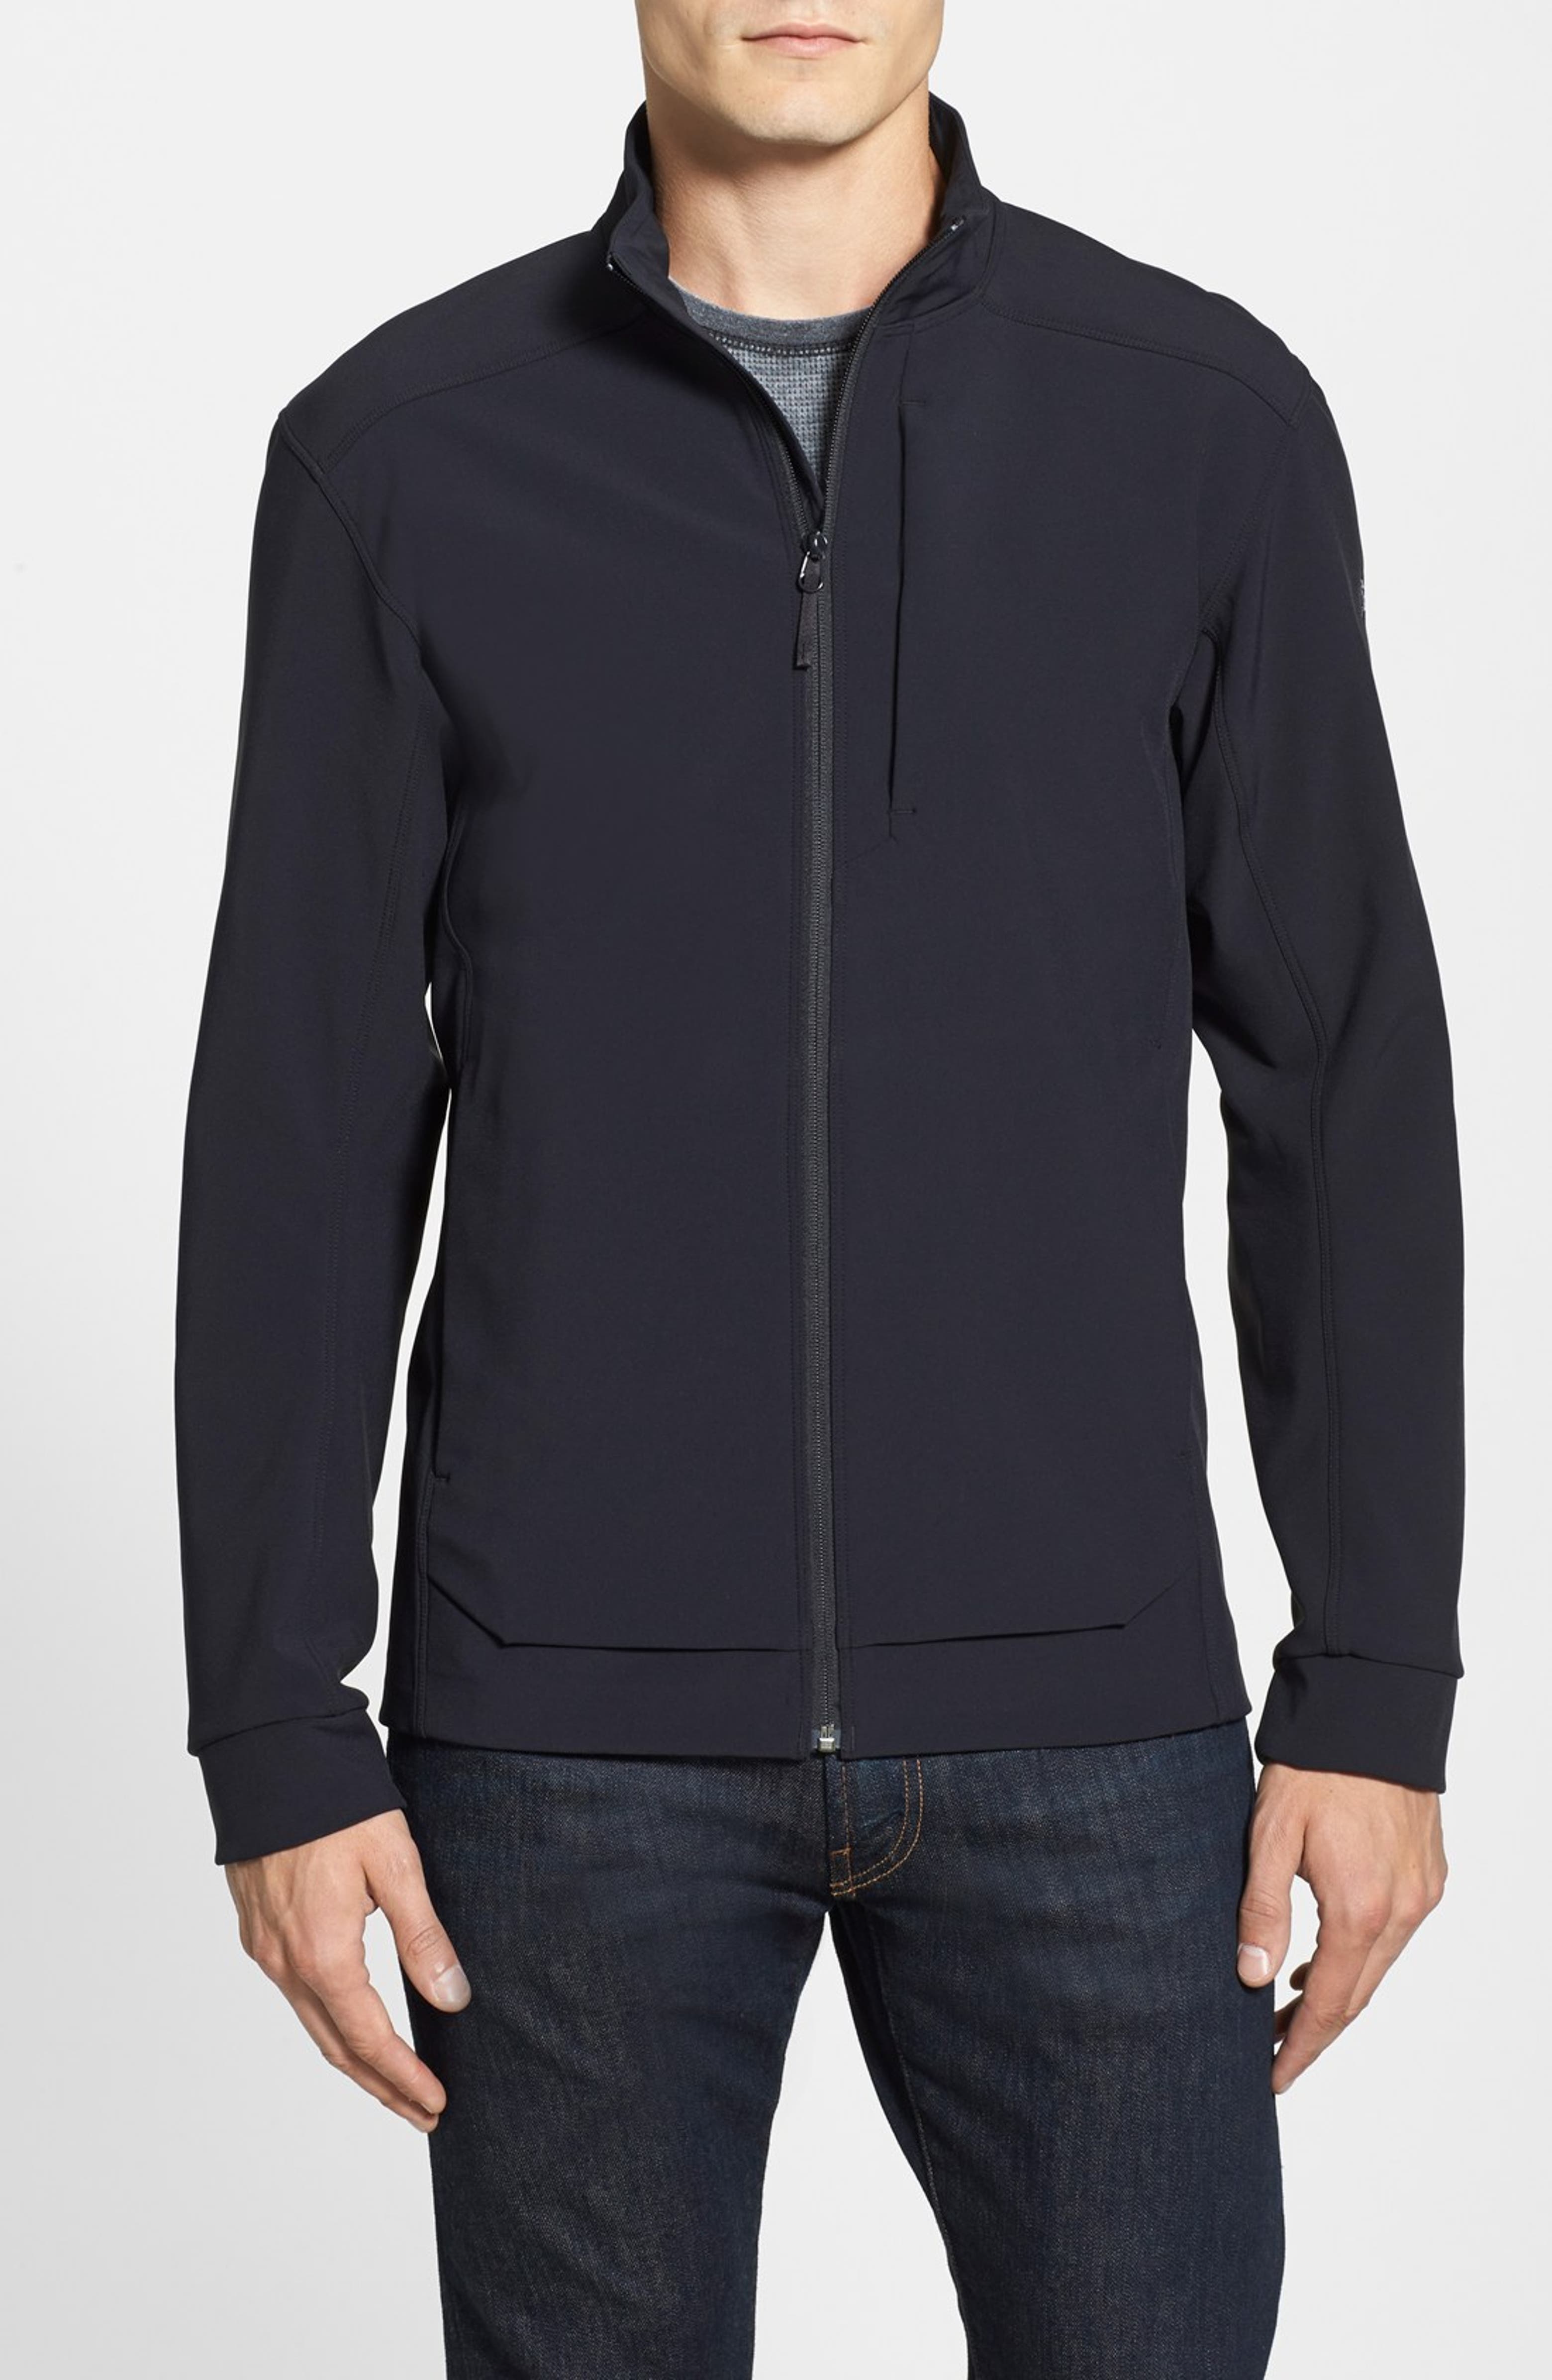 Arc'teryx 'Karda' Water Resistant Athletic Fit Soft Shell Jacket ...